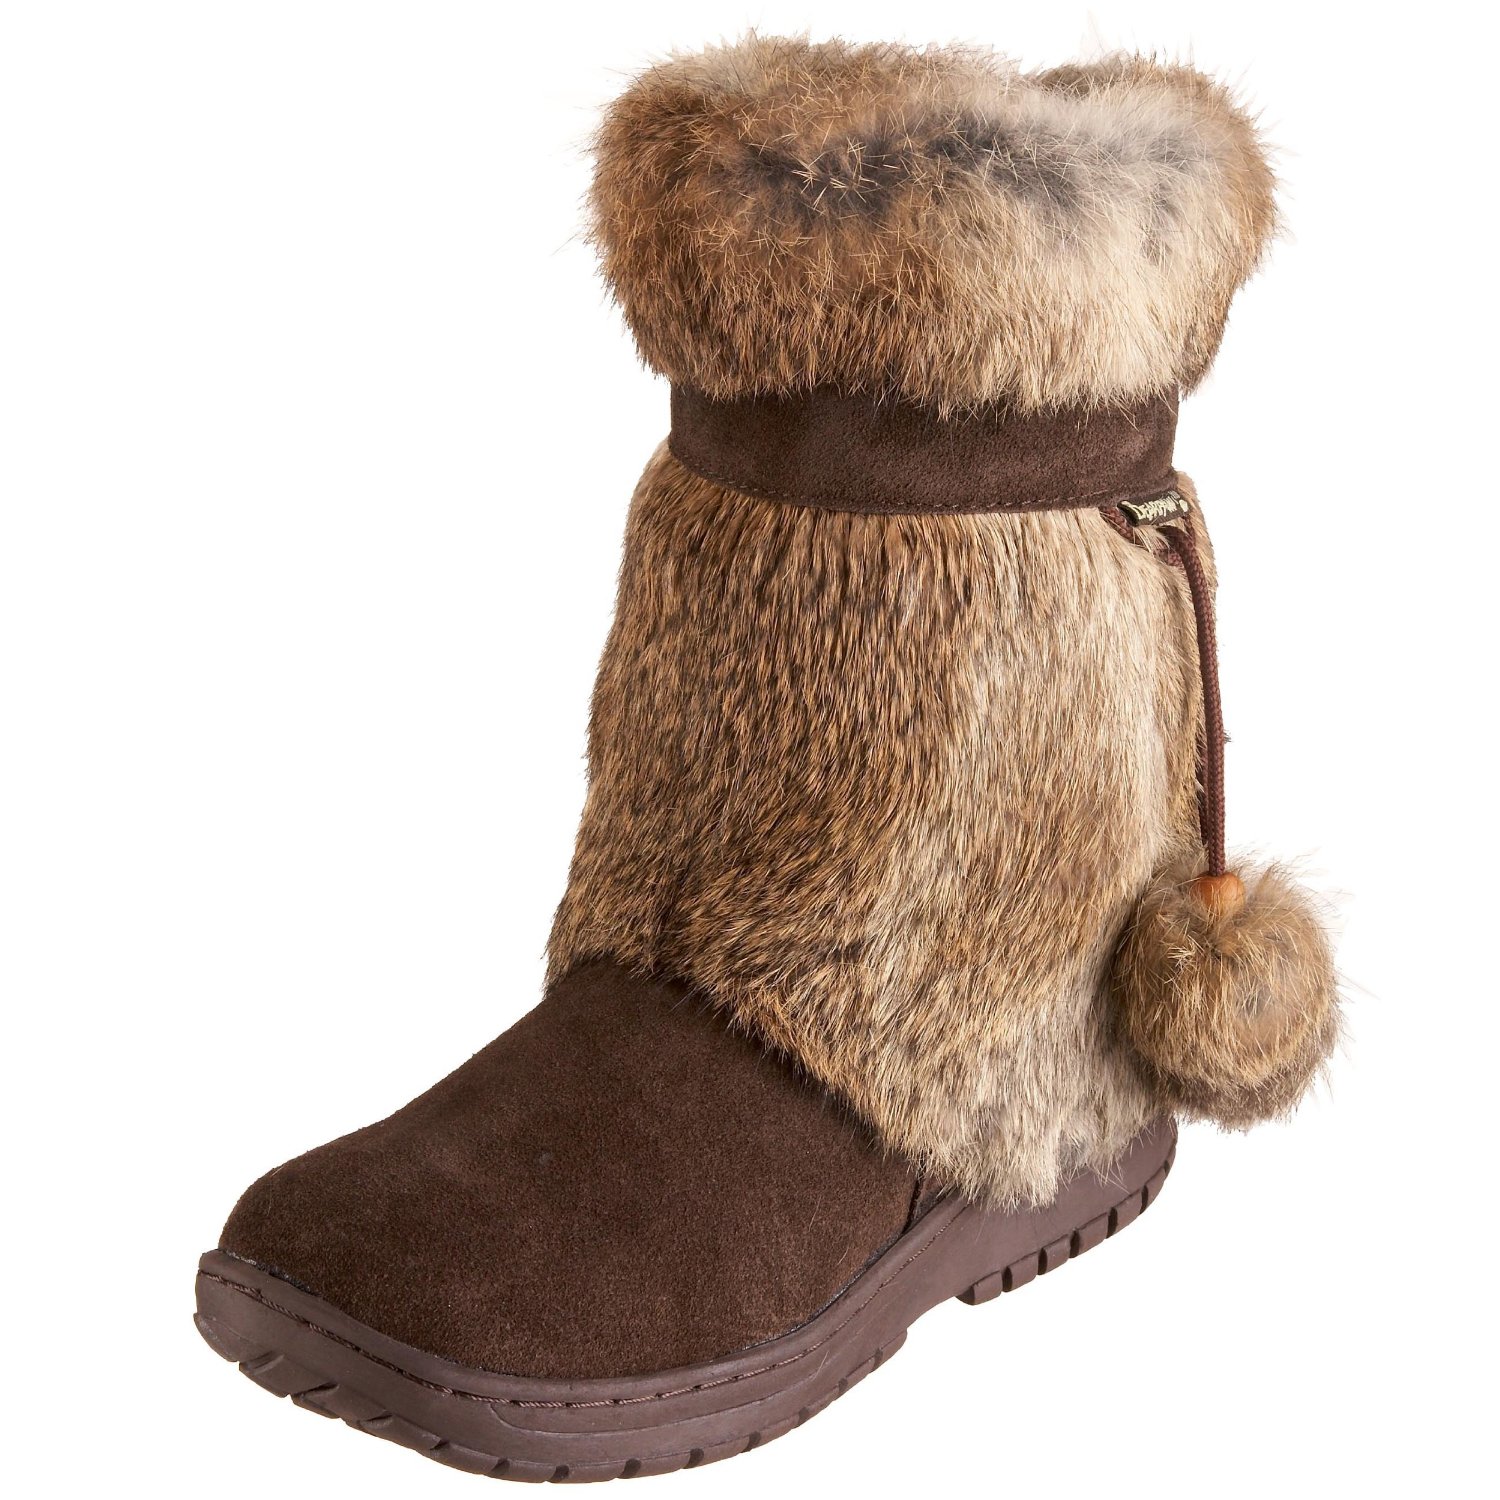 Dresses, Denim & Diaper Bags: Boots with the Fur (with the fur)